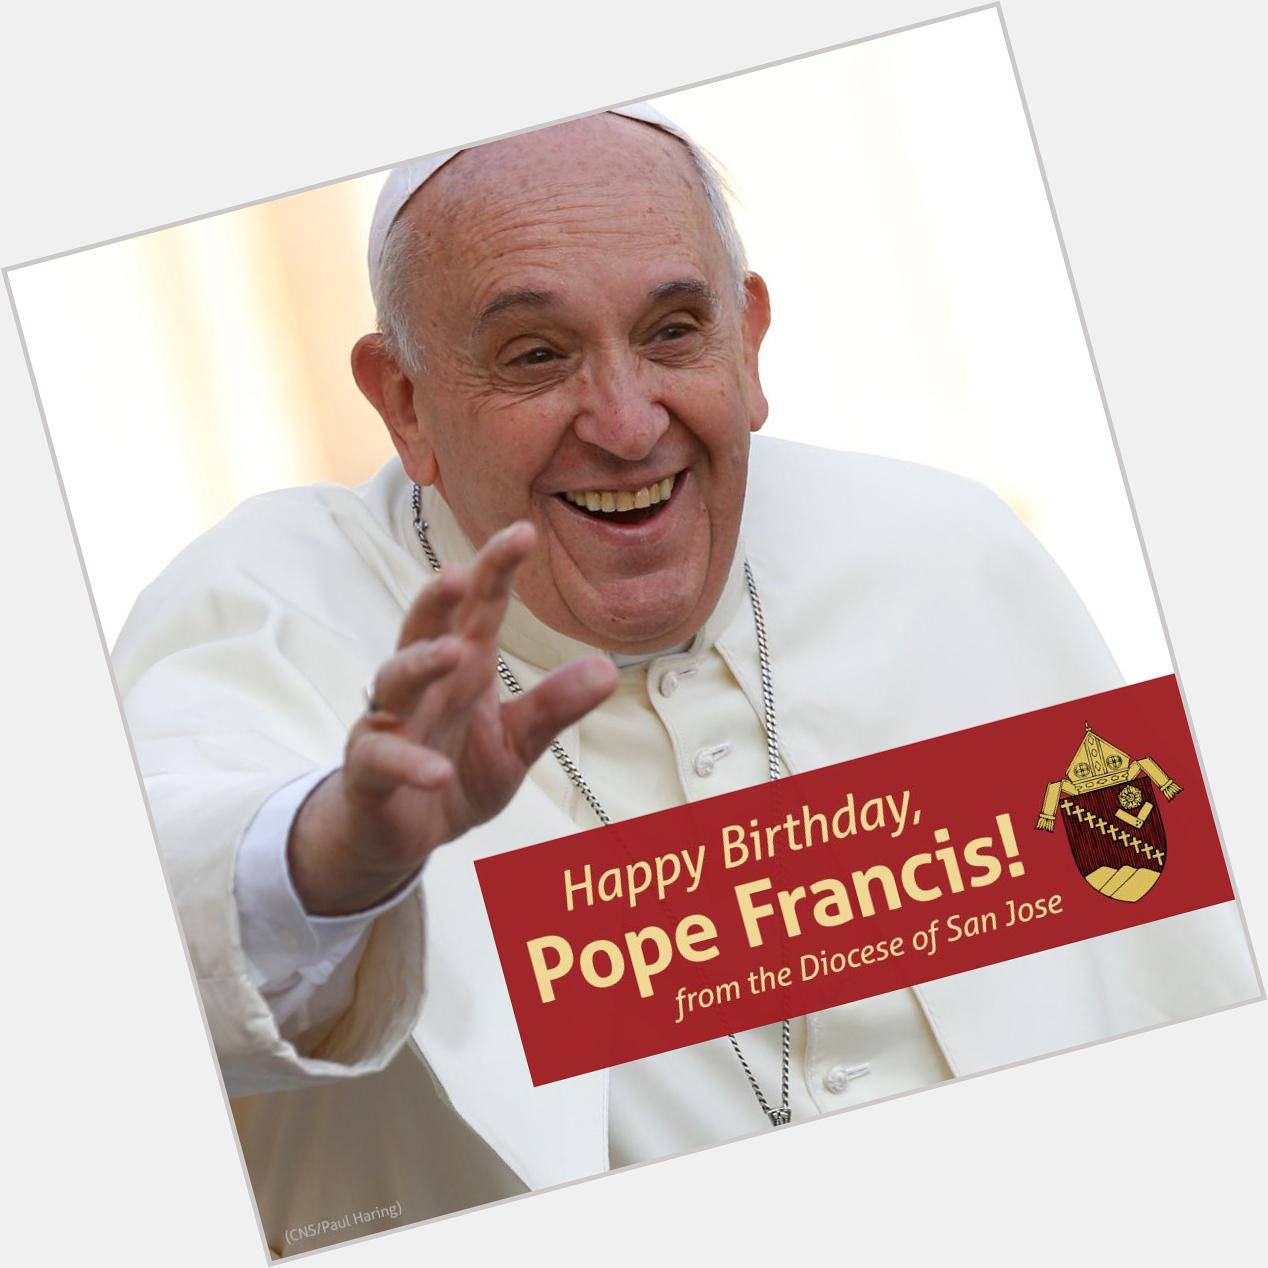 Happy birthday to our Pope Francis! 